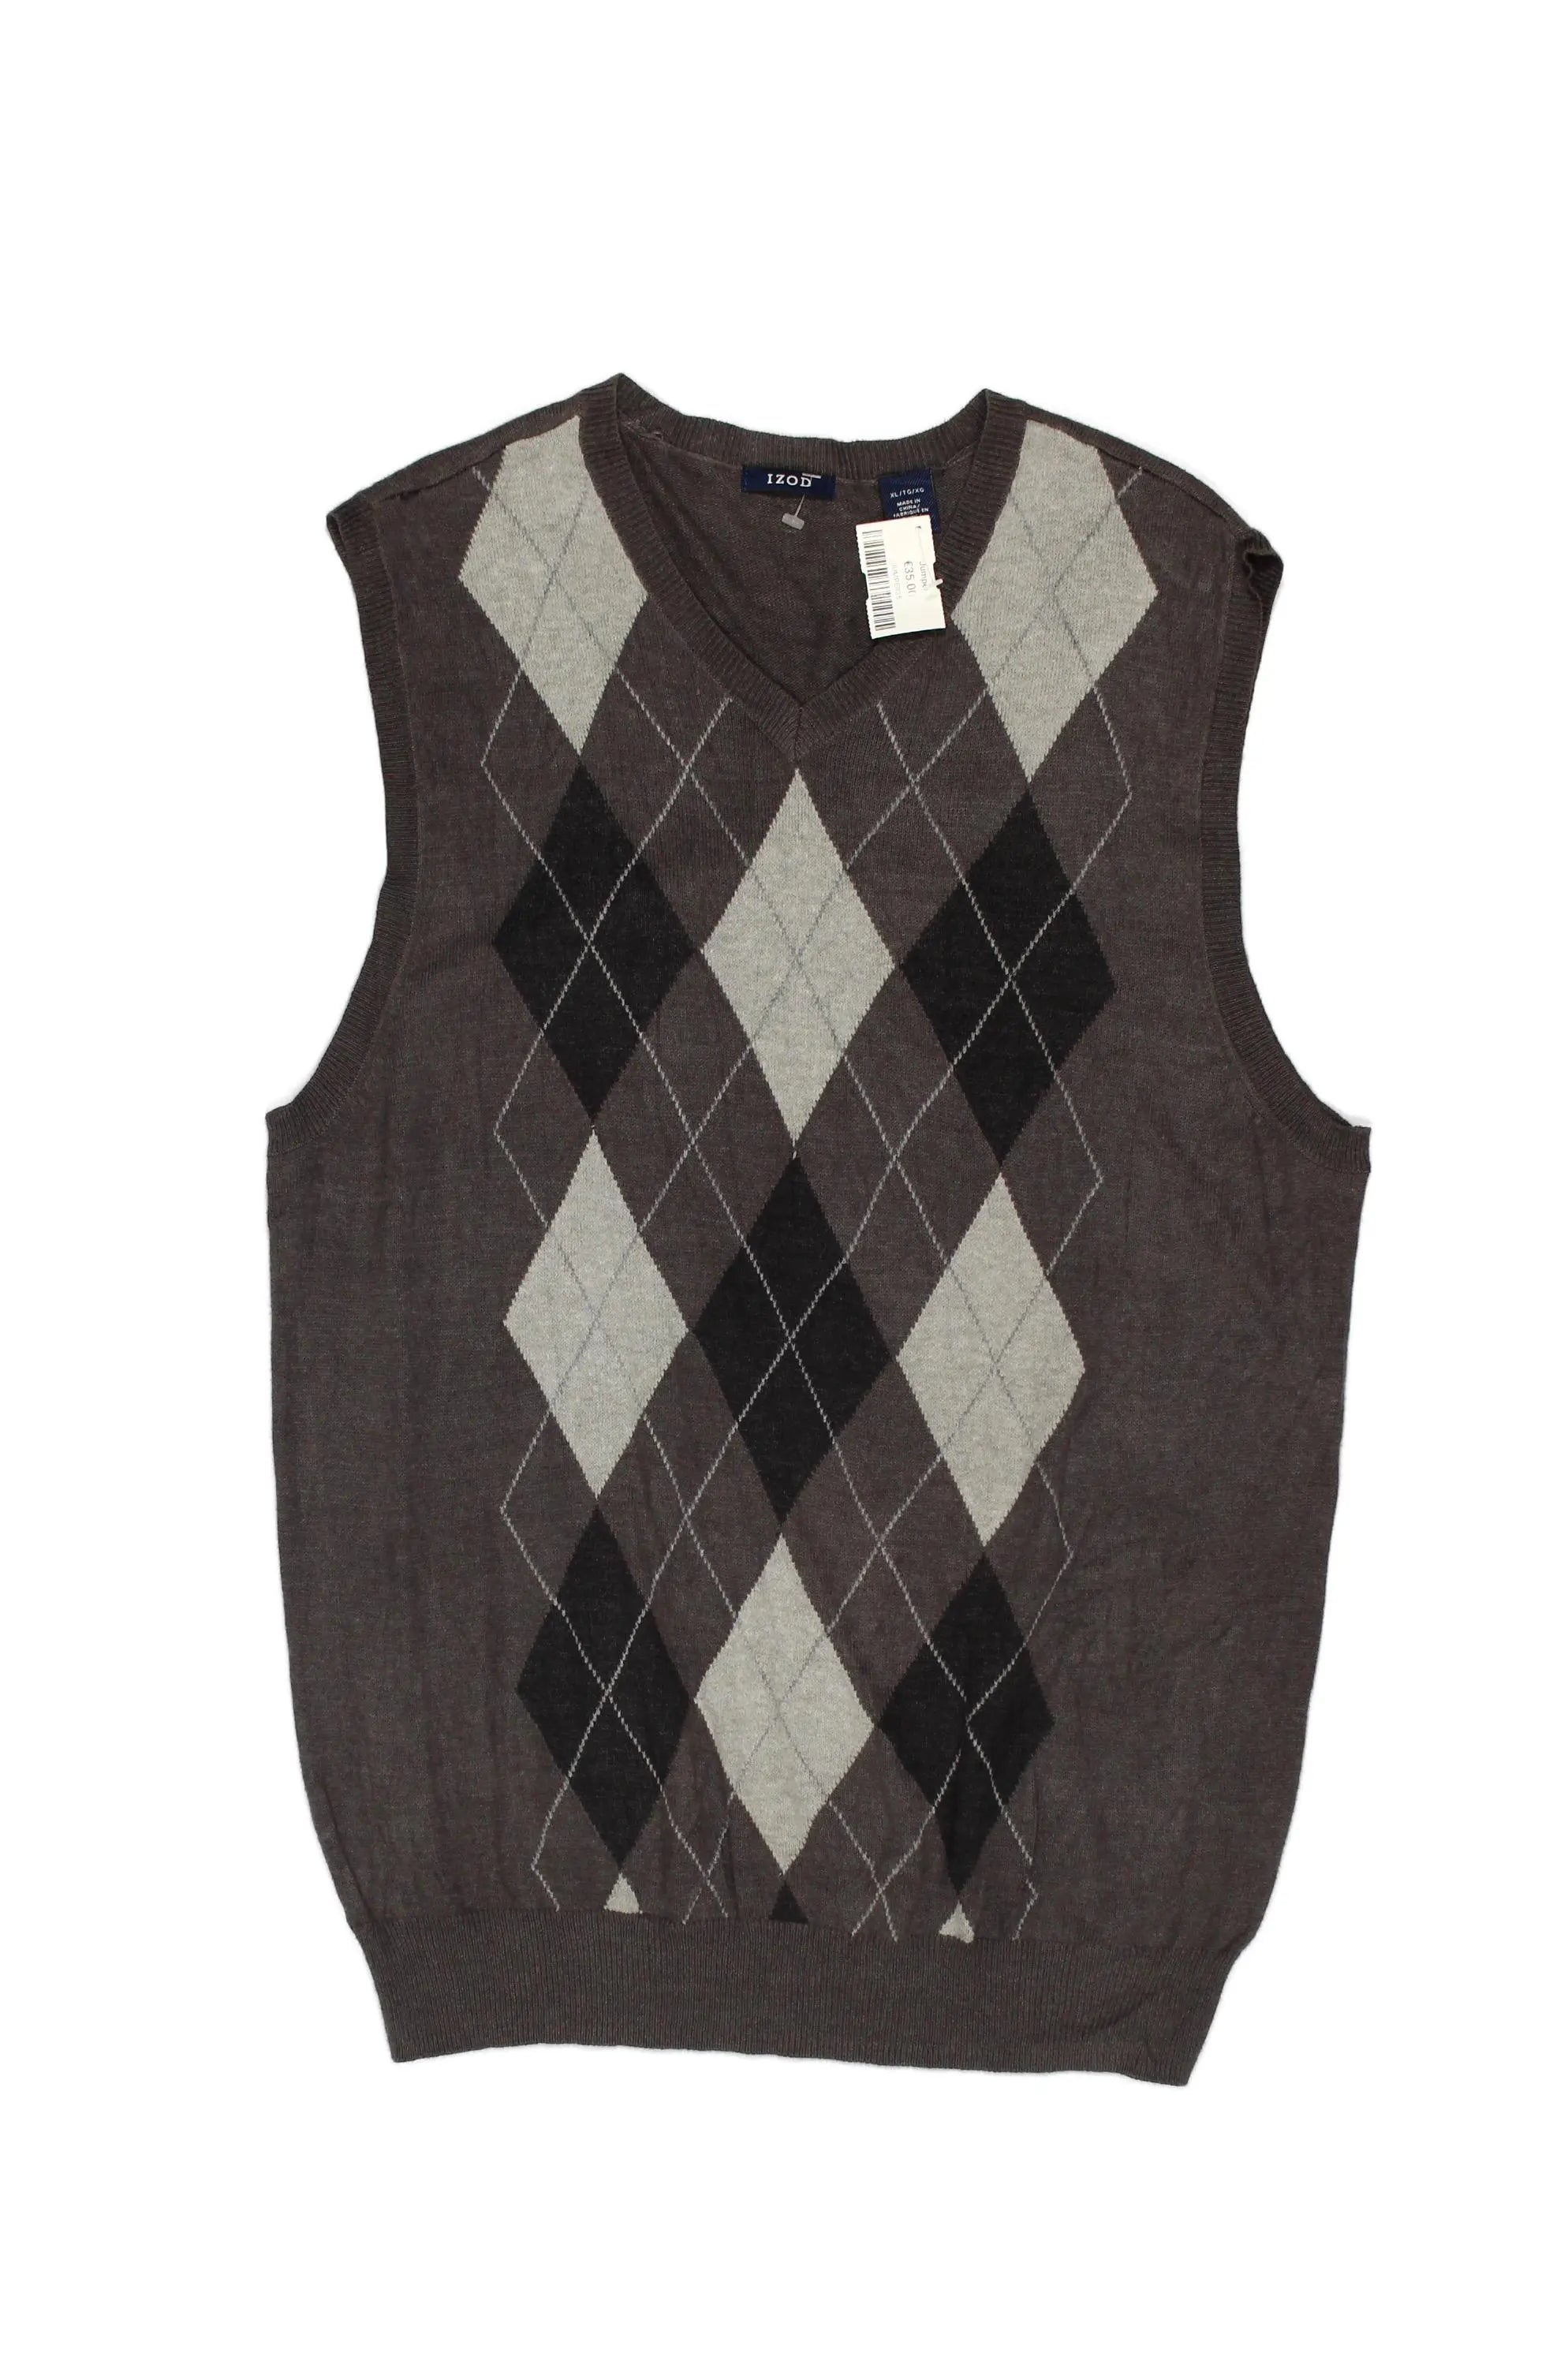 Izod - Knitted Vest- ThriftTale.com - Vintage and second handclothing